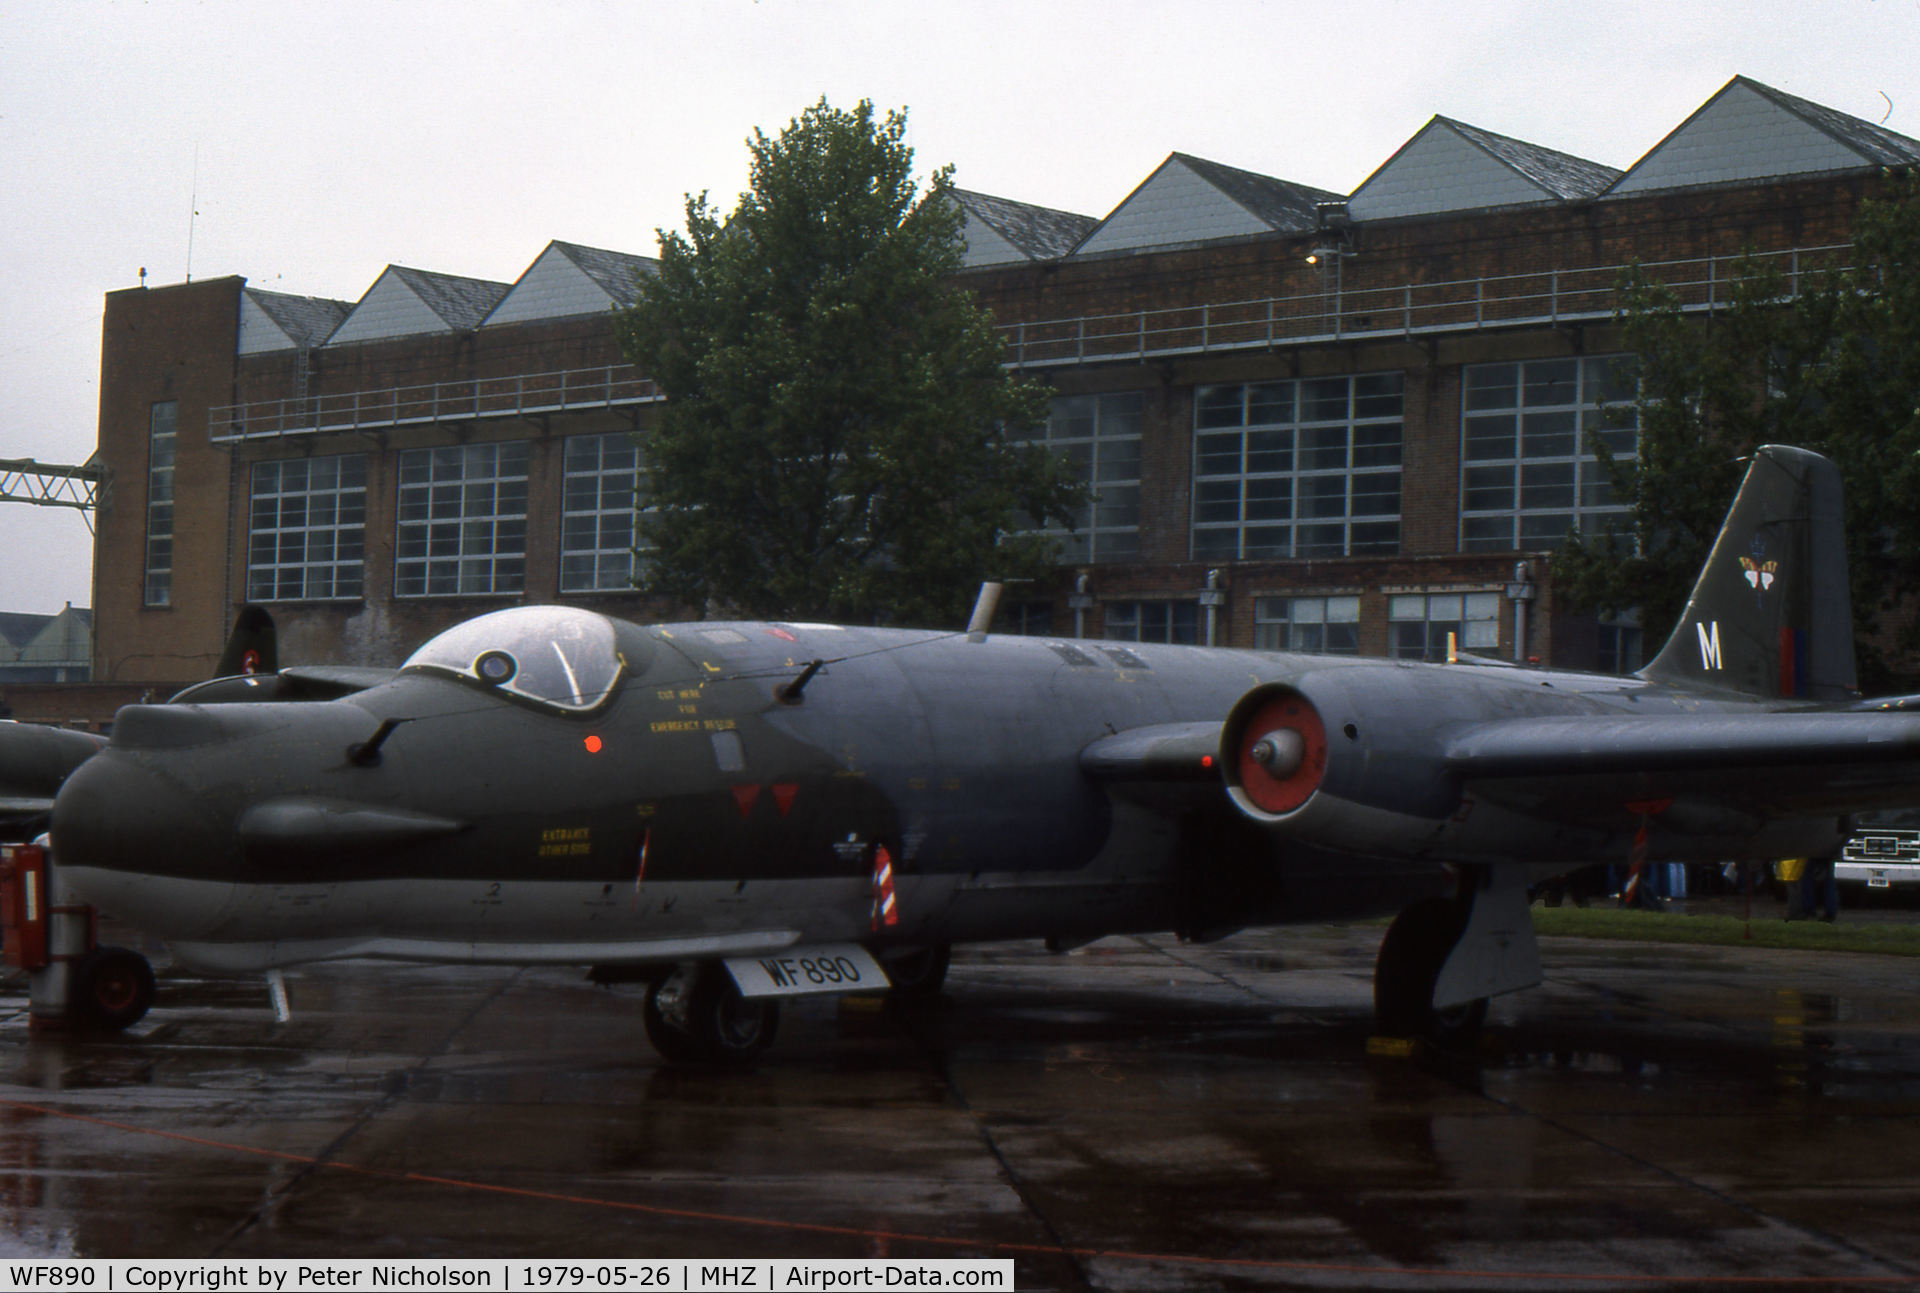 WF890, 1952 English Electric Canberra T.17 C/N EEP71091, Canberra T.17 of 360 Squadron at RAF Wyton on display at the 1979 RAF Mildenhall Air Fete